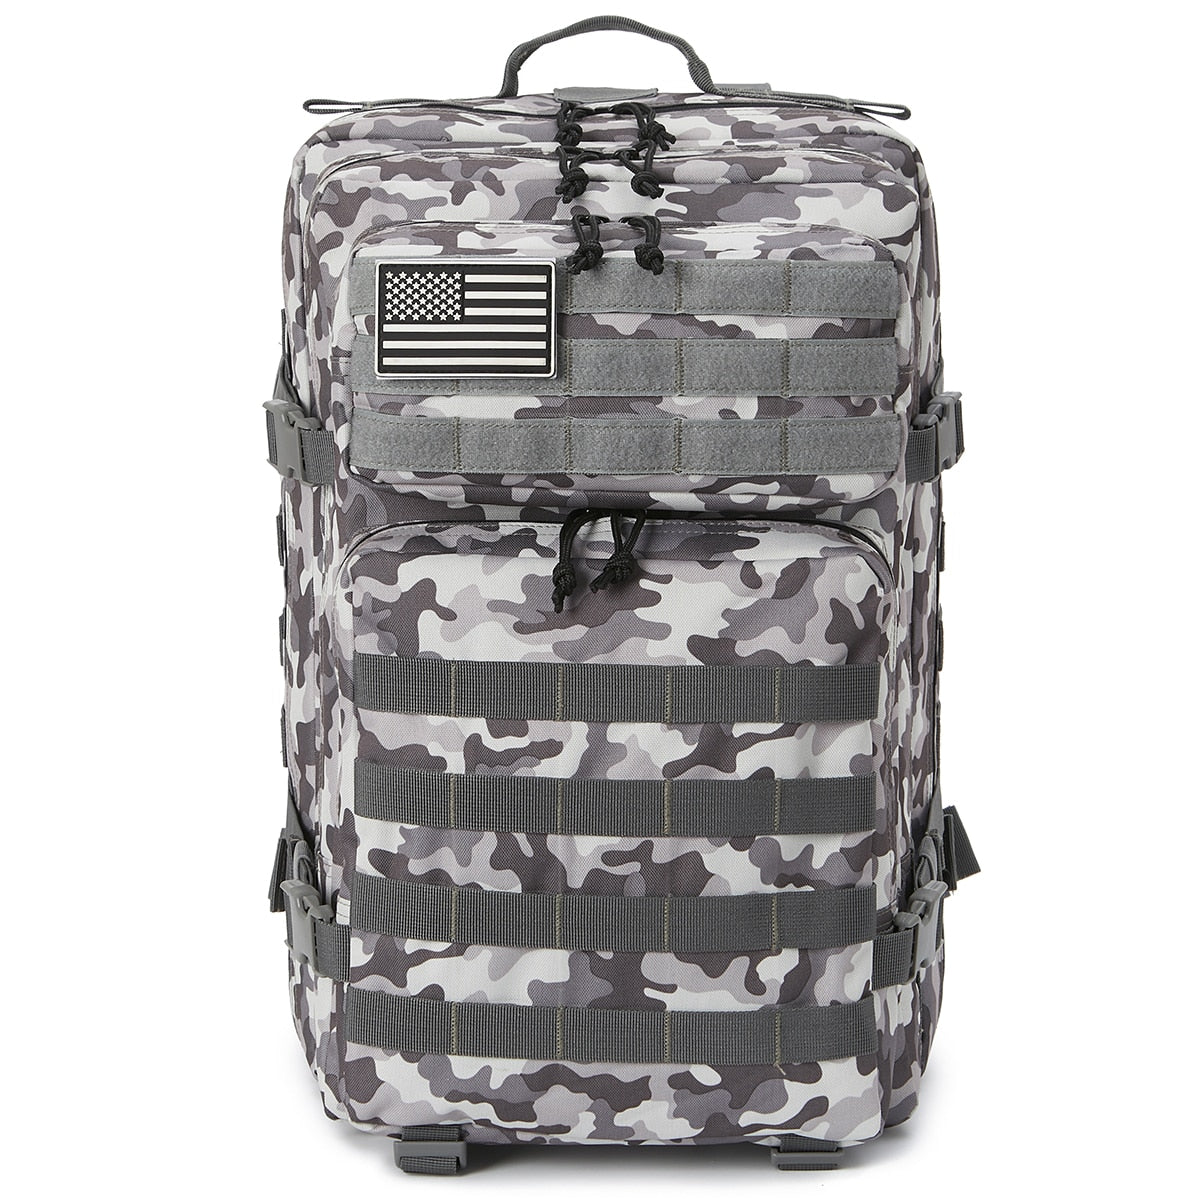 50L Military Assault Camouflage Backpack With Molle System For Outdoor  Activities Ideal For Climbing, Hunting, Hiking, And Camping Man Army  Tactical Mochila Rucksack From Hui09, $20.83